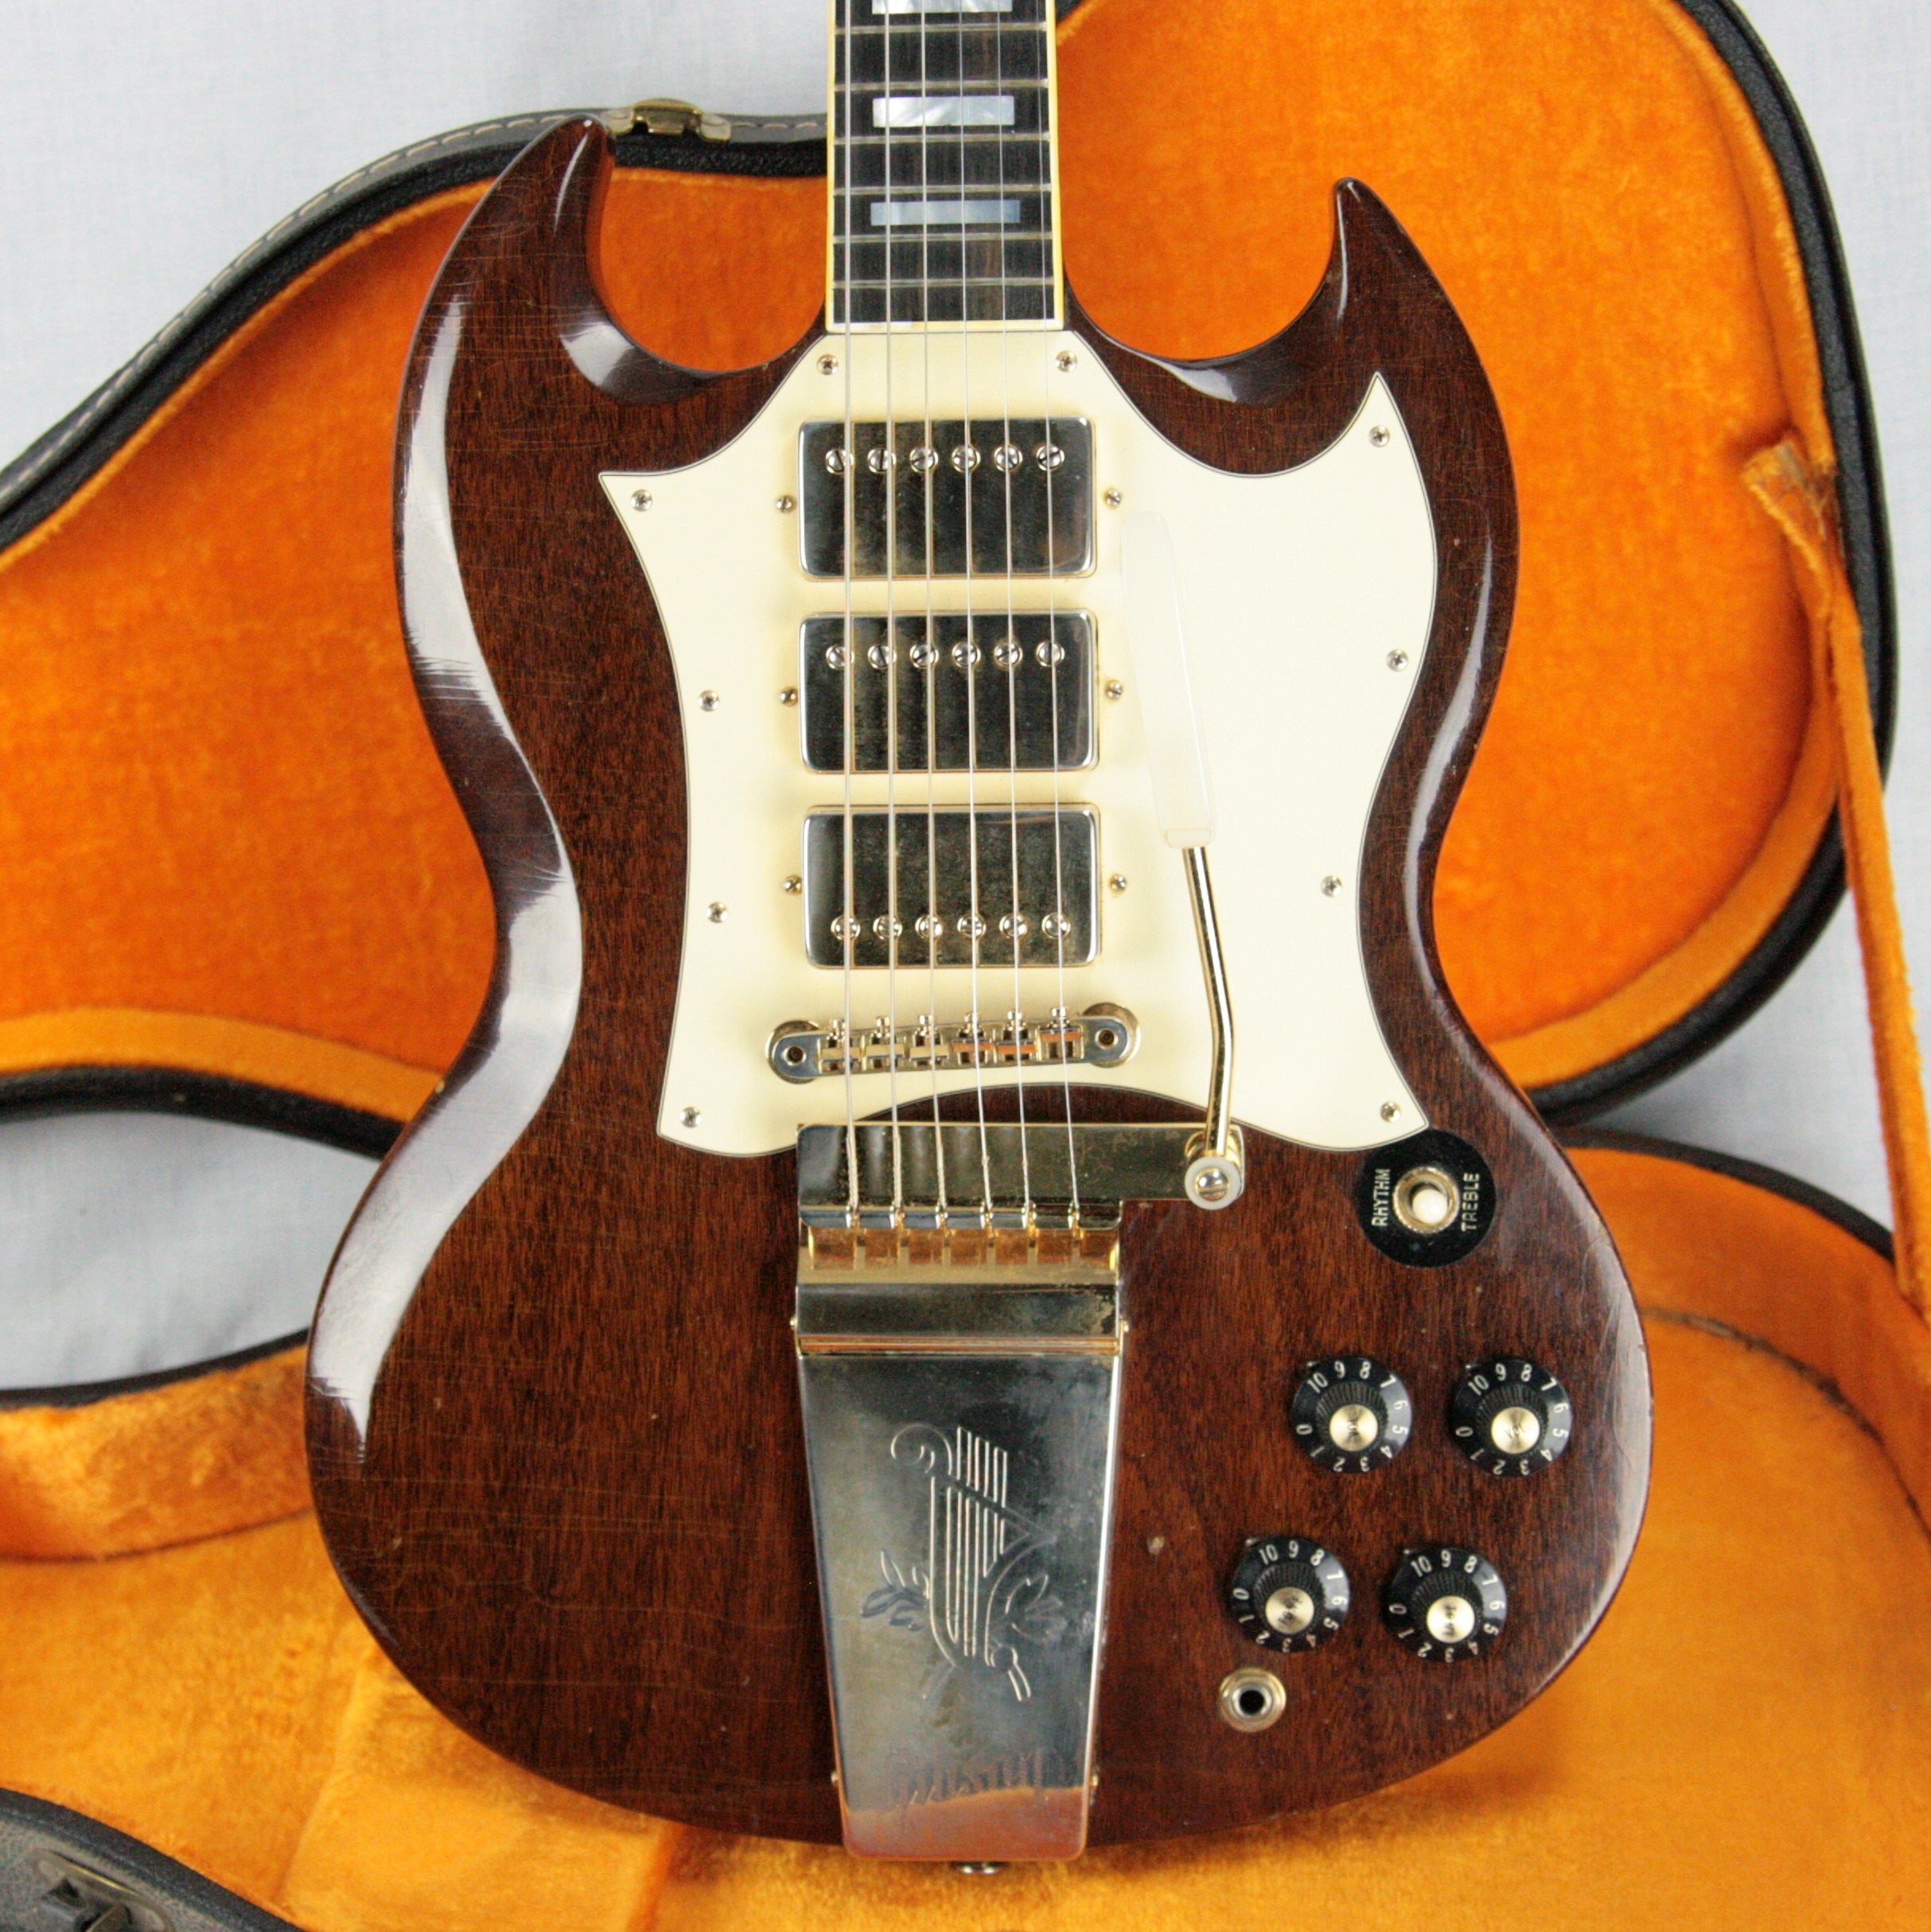 1960's Gibson SG Custom in walnut with 3 pickups